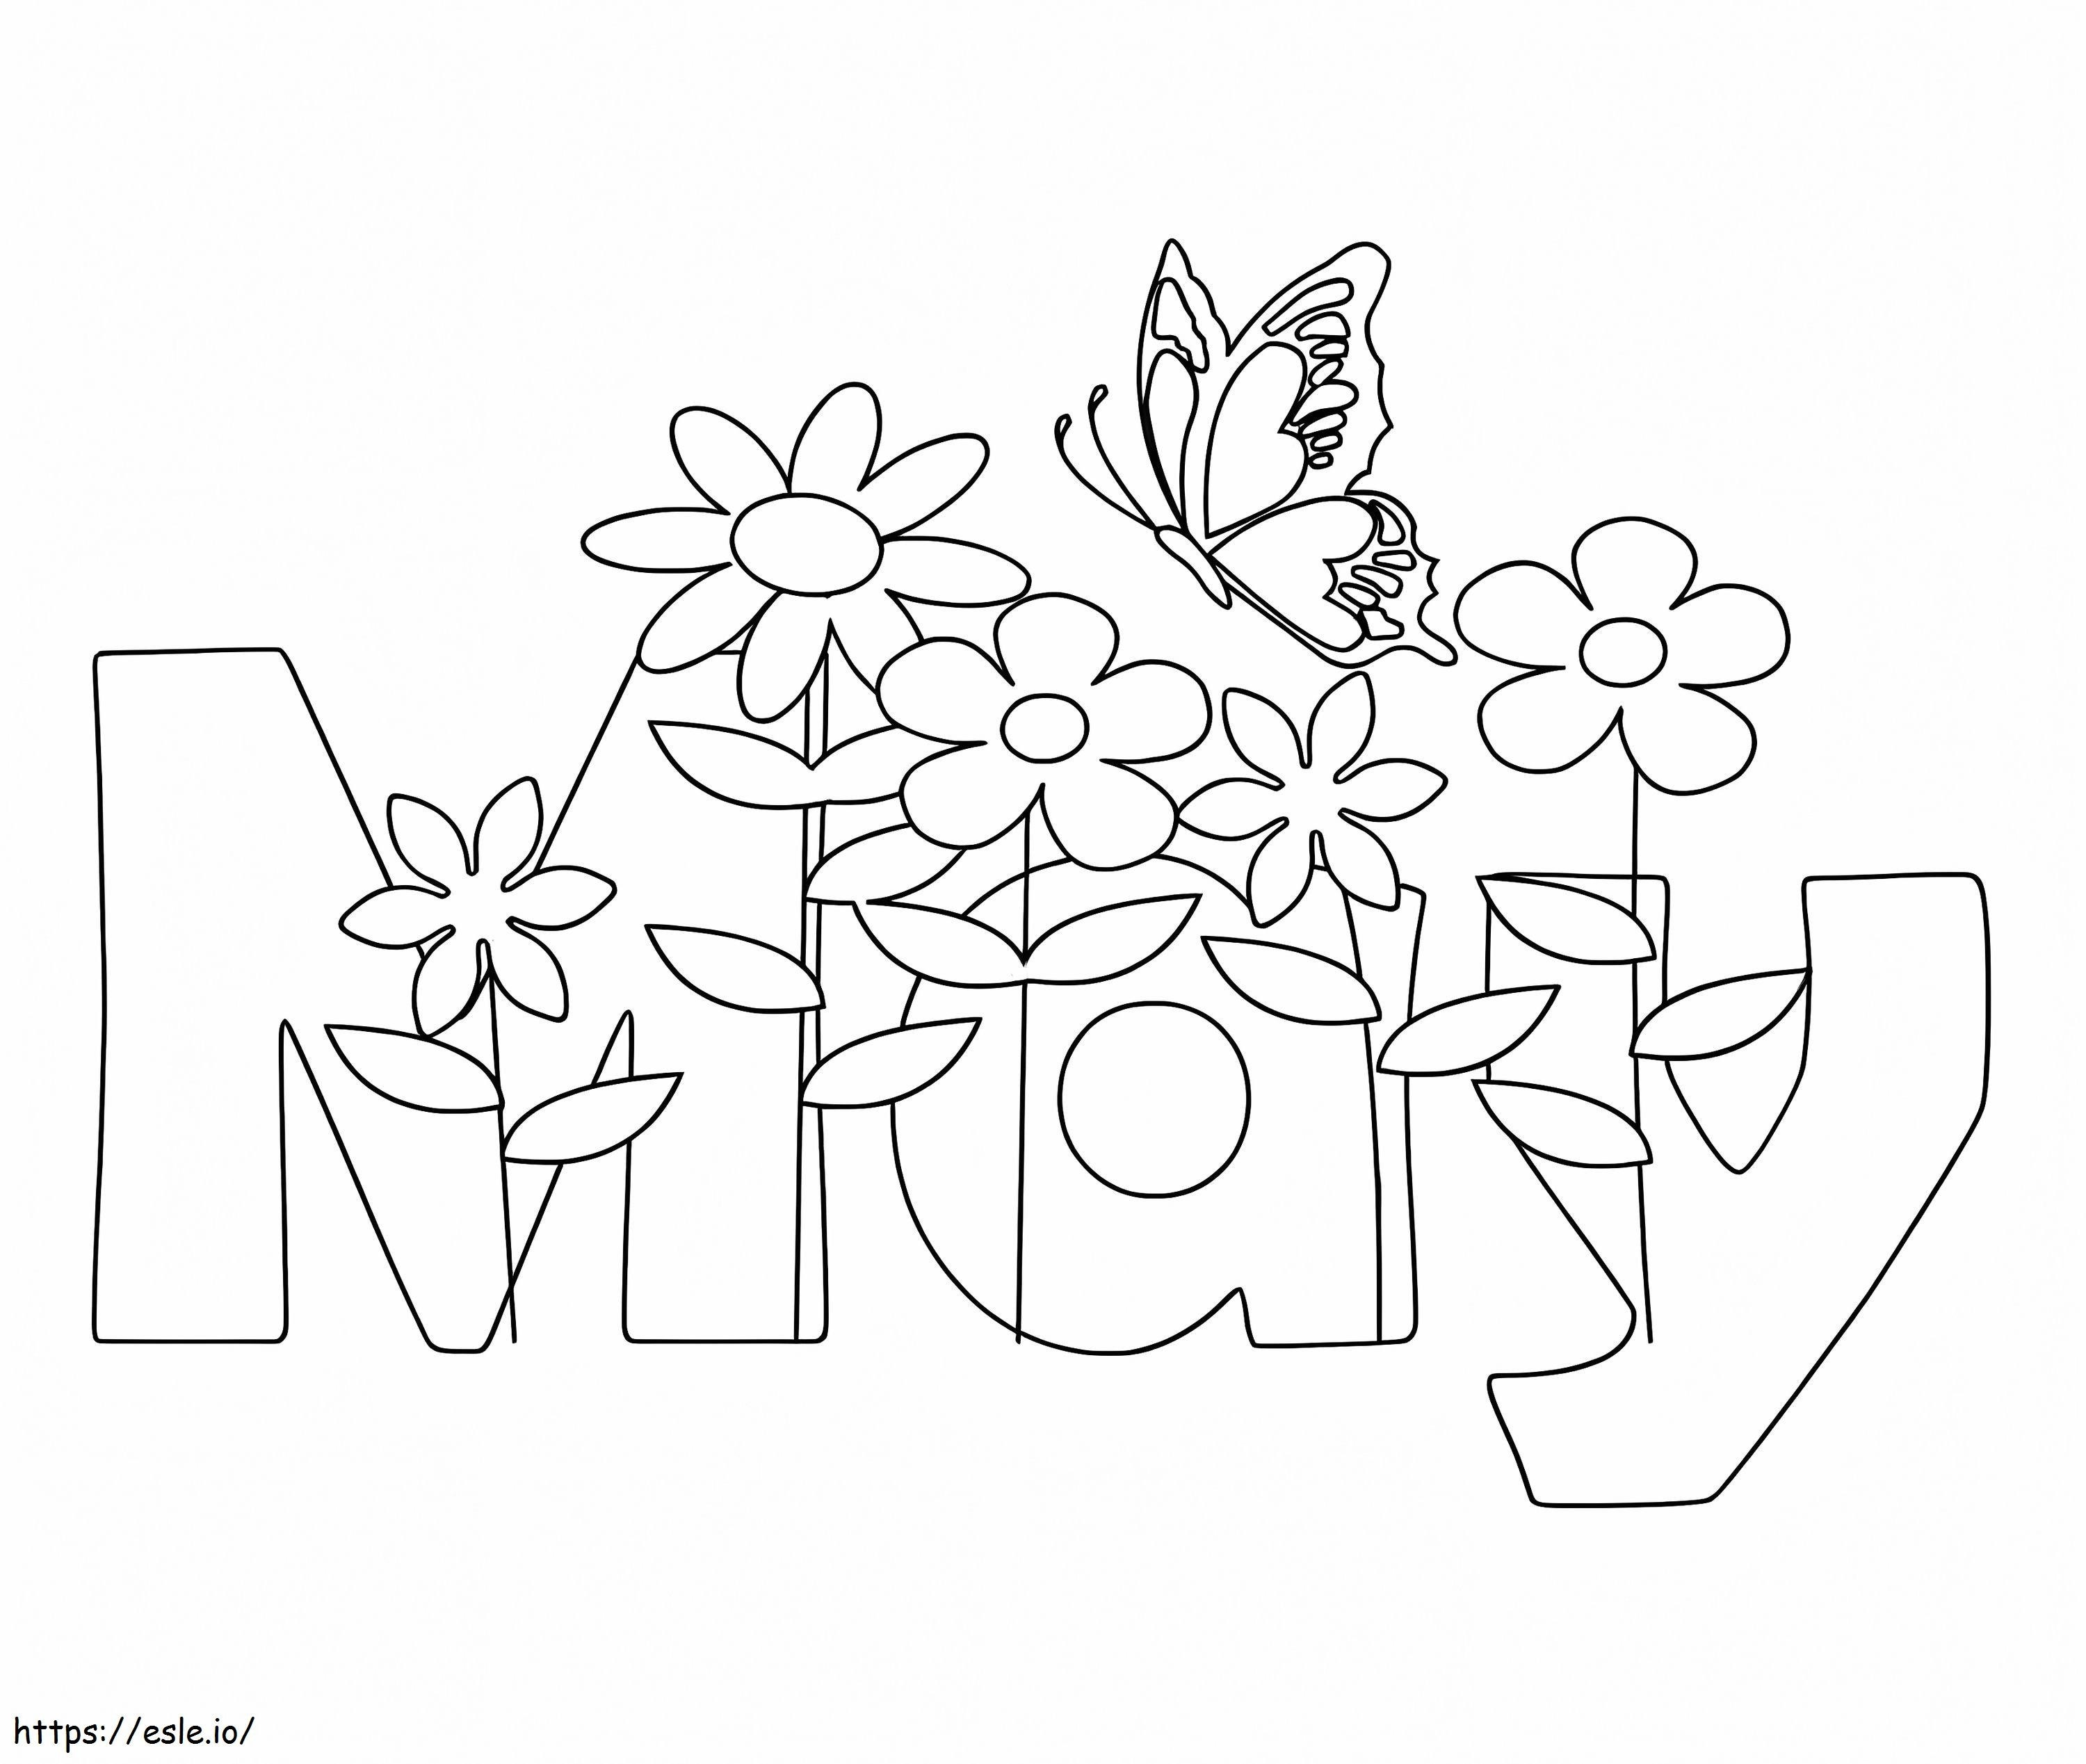 May Butterfly And Flower coloring page